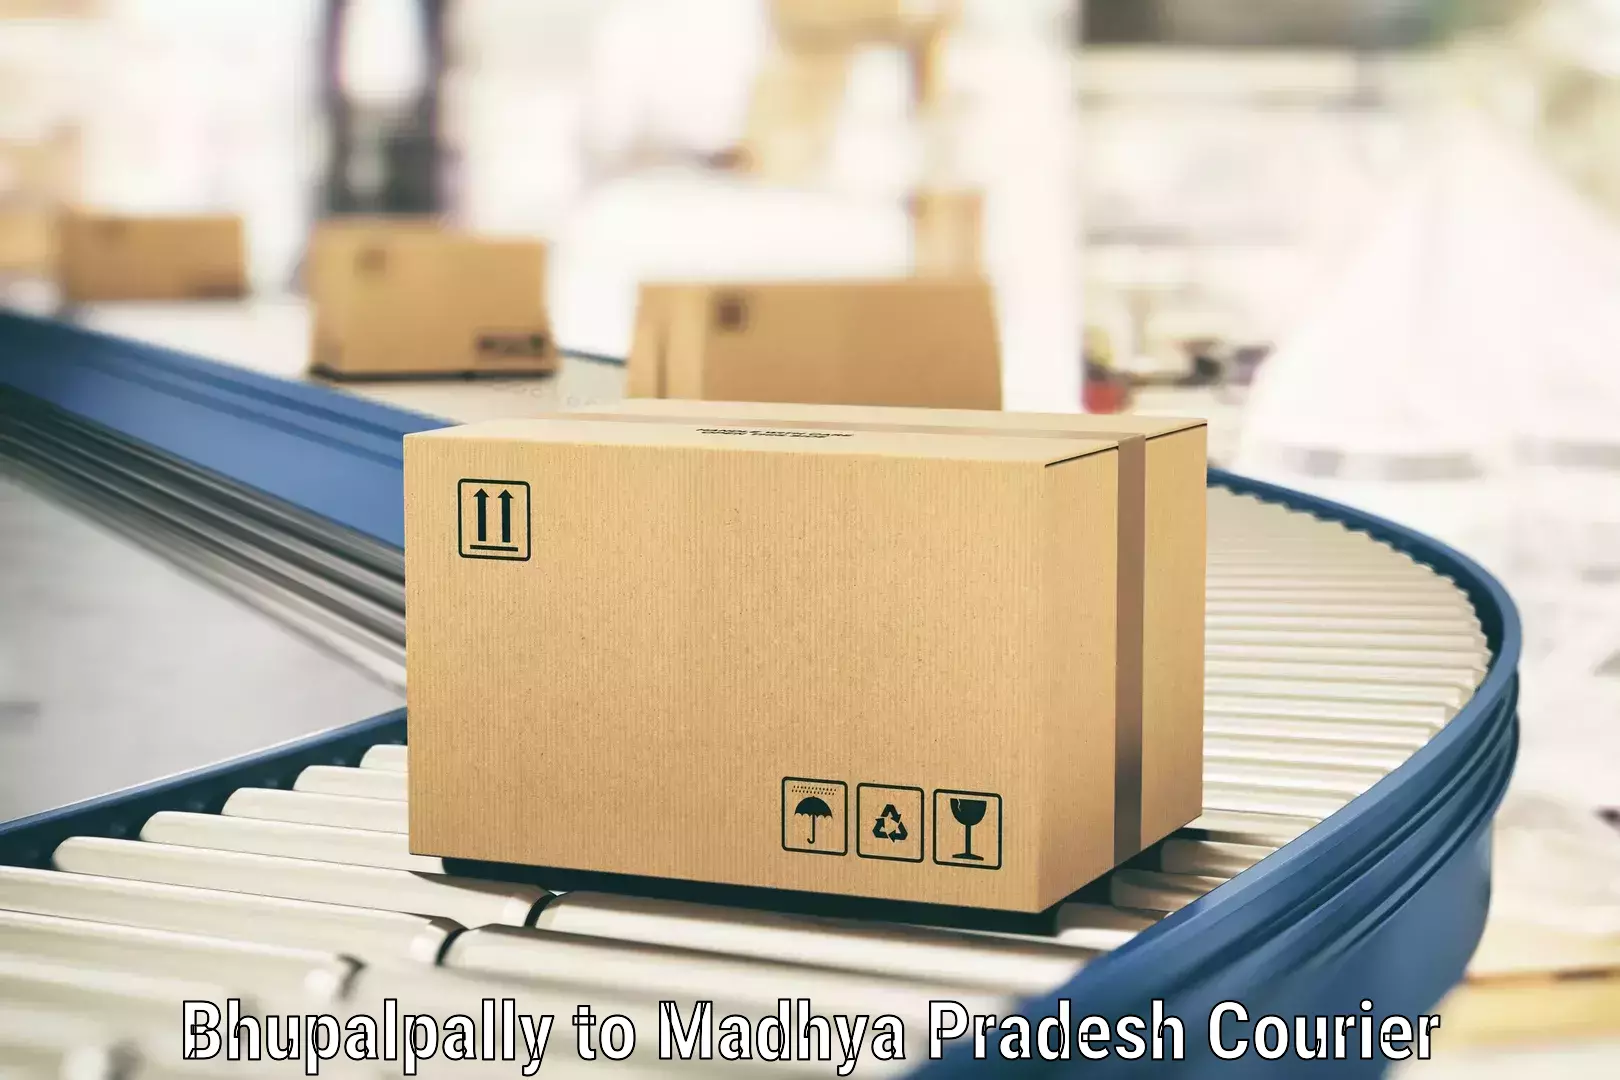 Parcel service for businesses Bhupalpally to Raghogarh